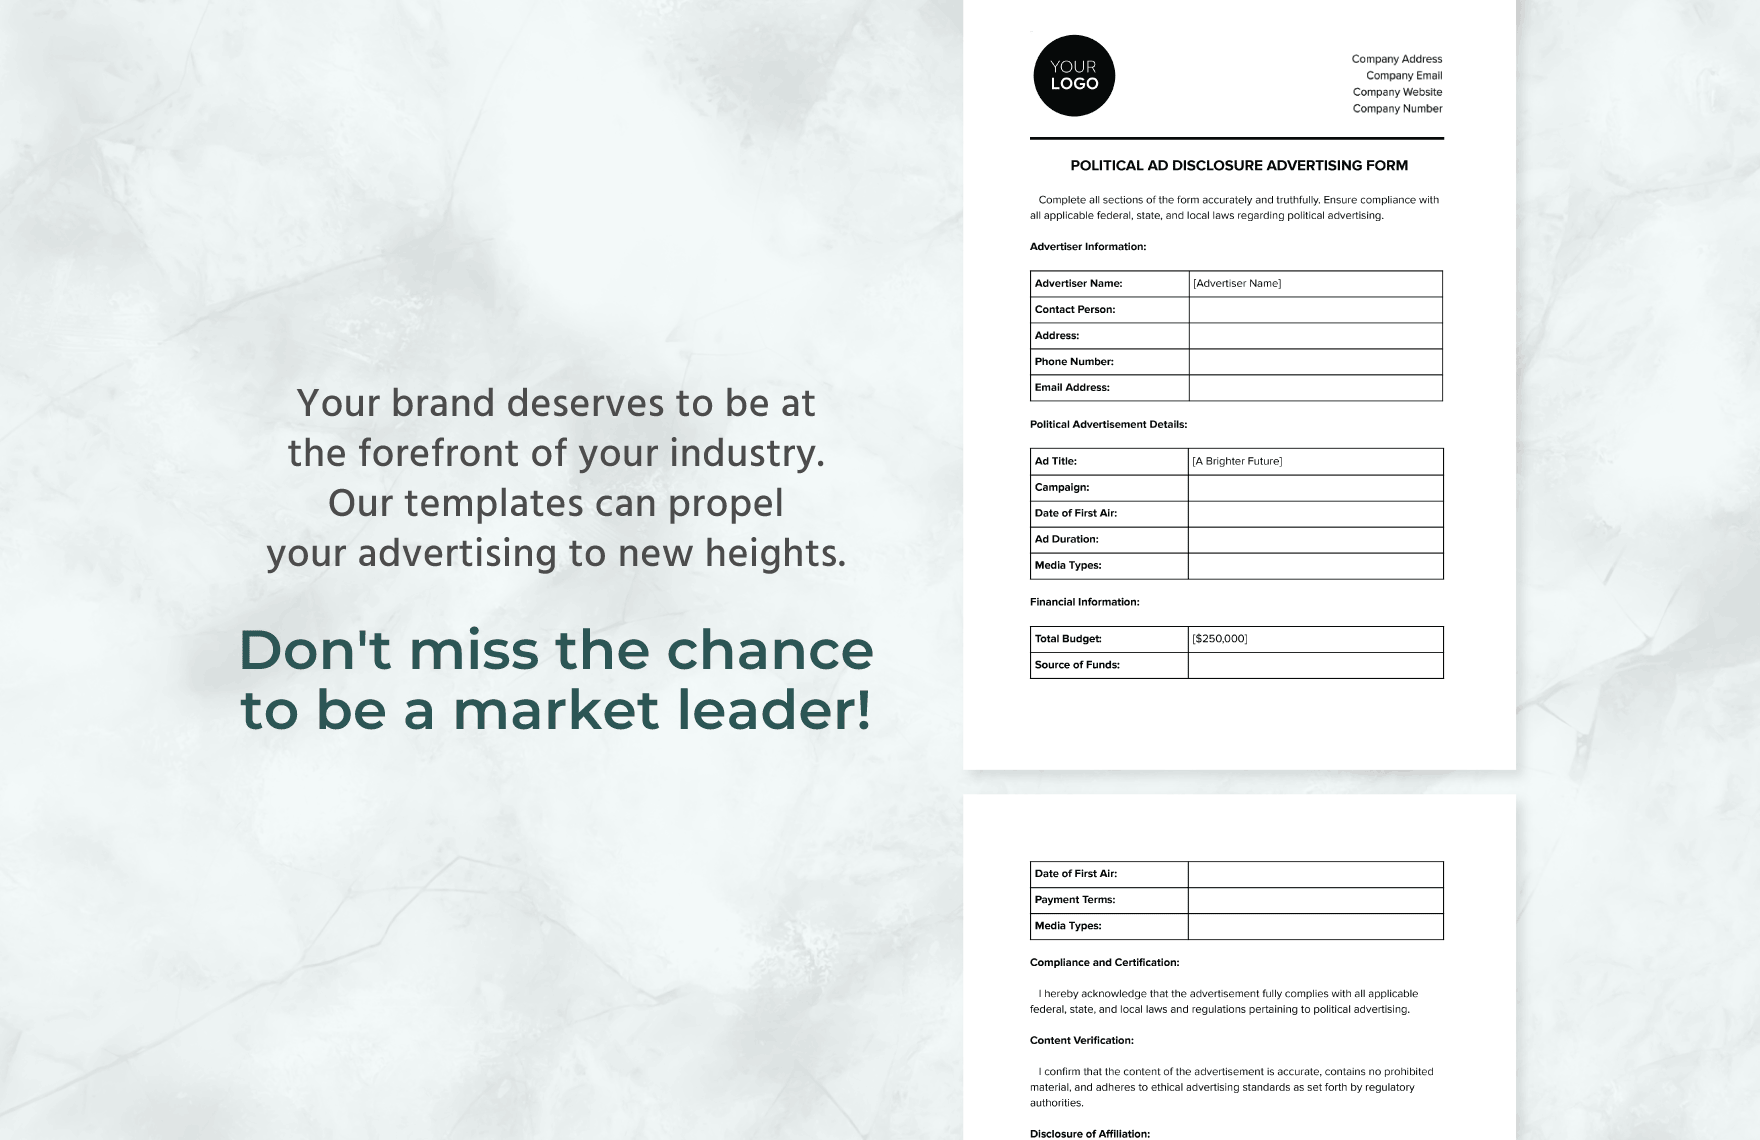 Political Ad Disclosure Advertising Form Template